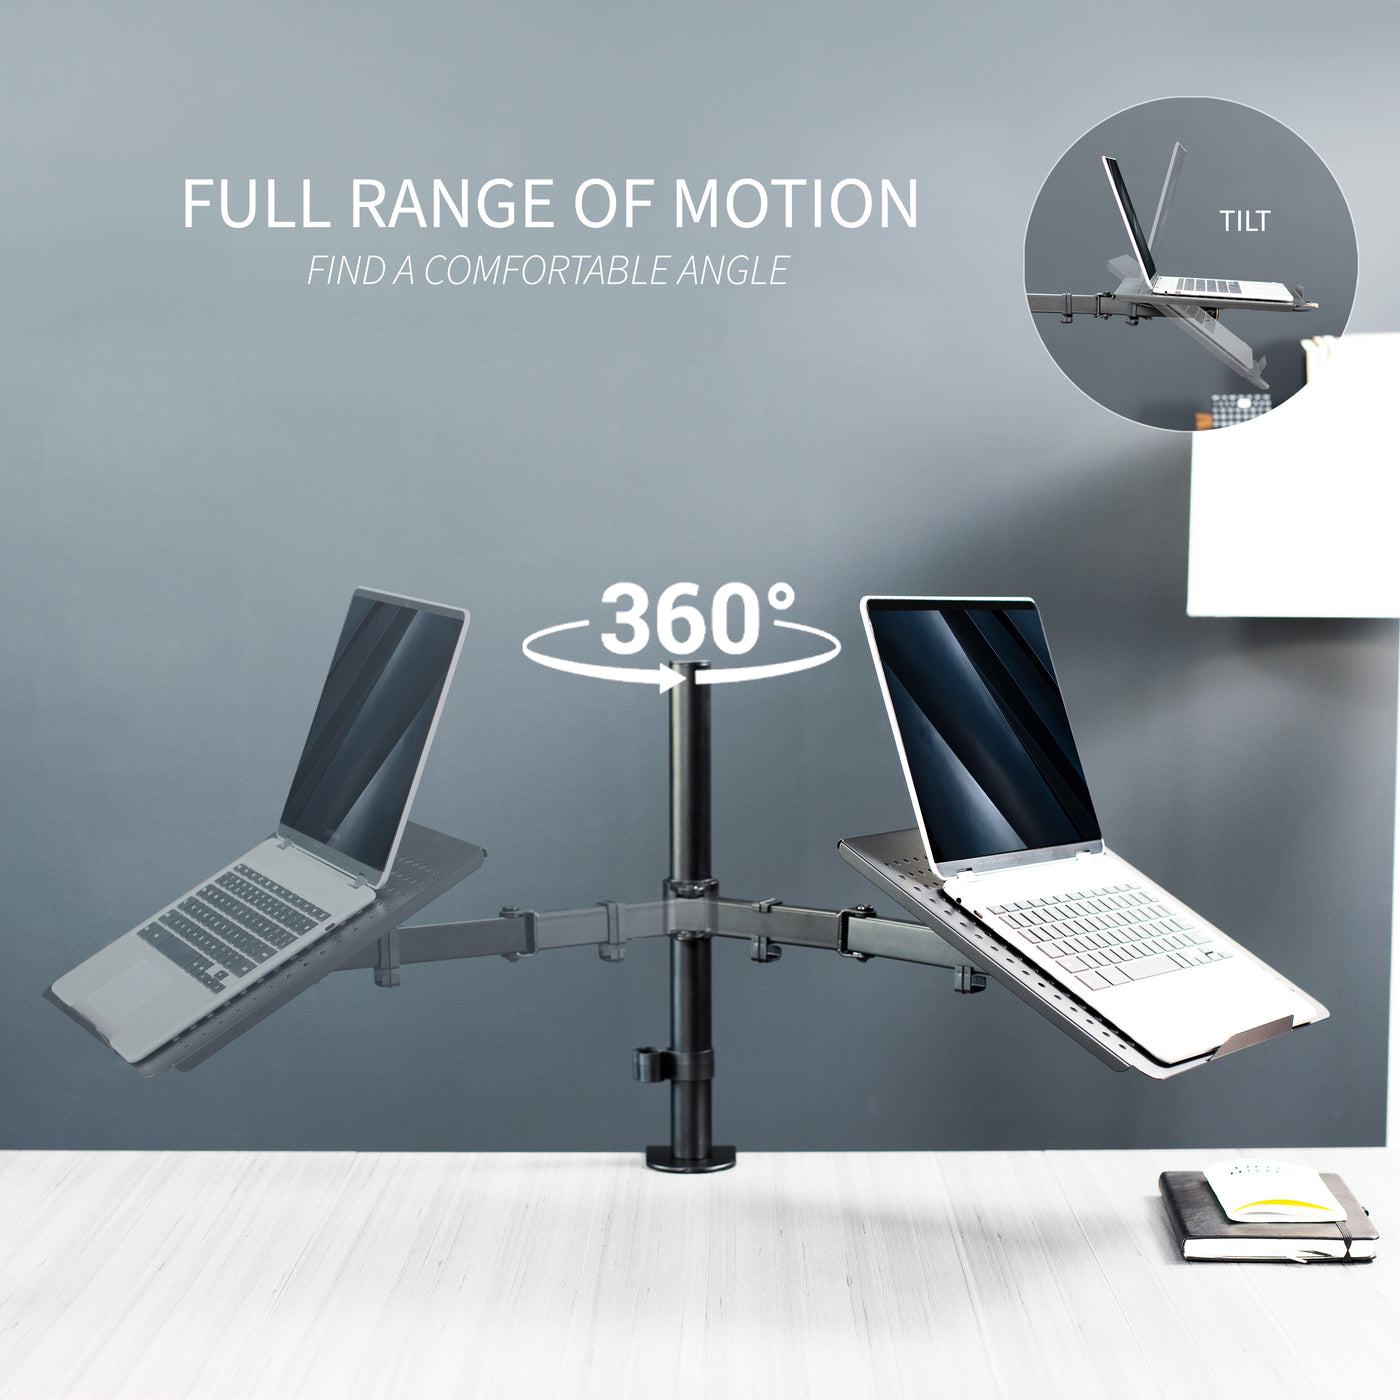 Height adjustable clamp-on laptop stand with ventilation and cable management.